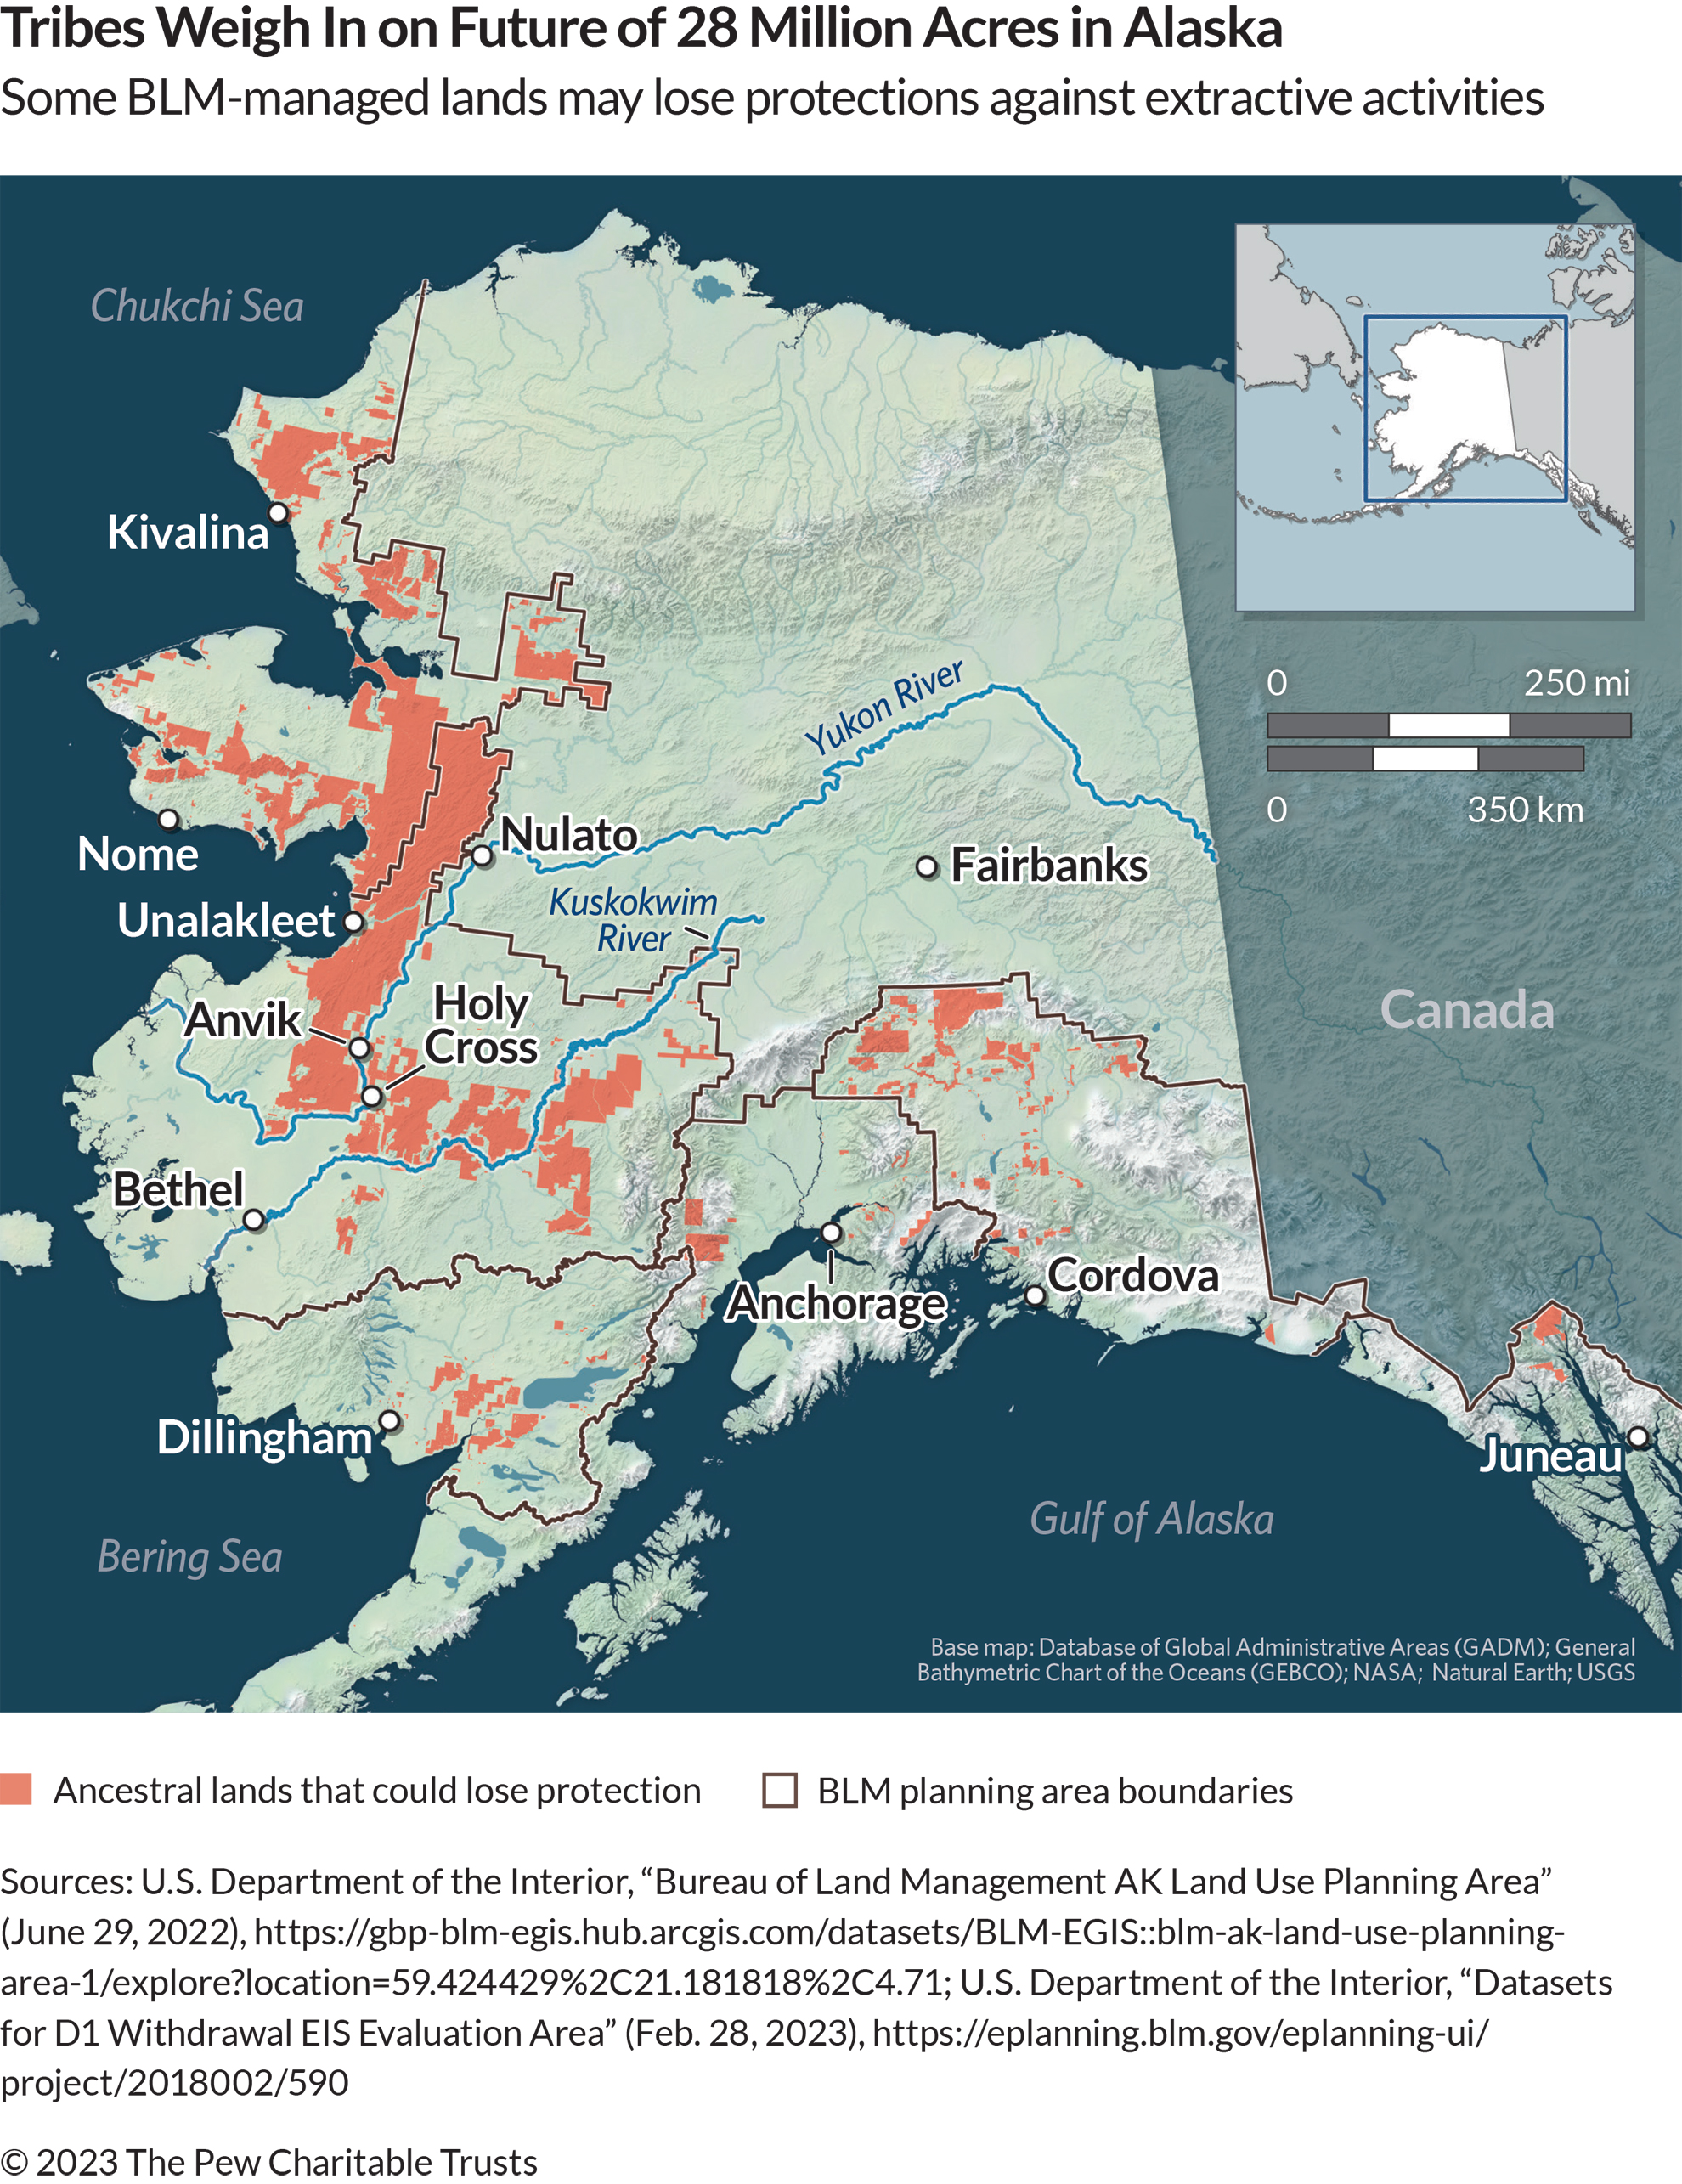 A map of Alaska showing lands and rivers. The lands are light green and the rivers are dark blue. Certain lands that could lose protections are colored a rusty orange and thick, brown lines indicate planning area boundaries. 